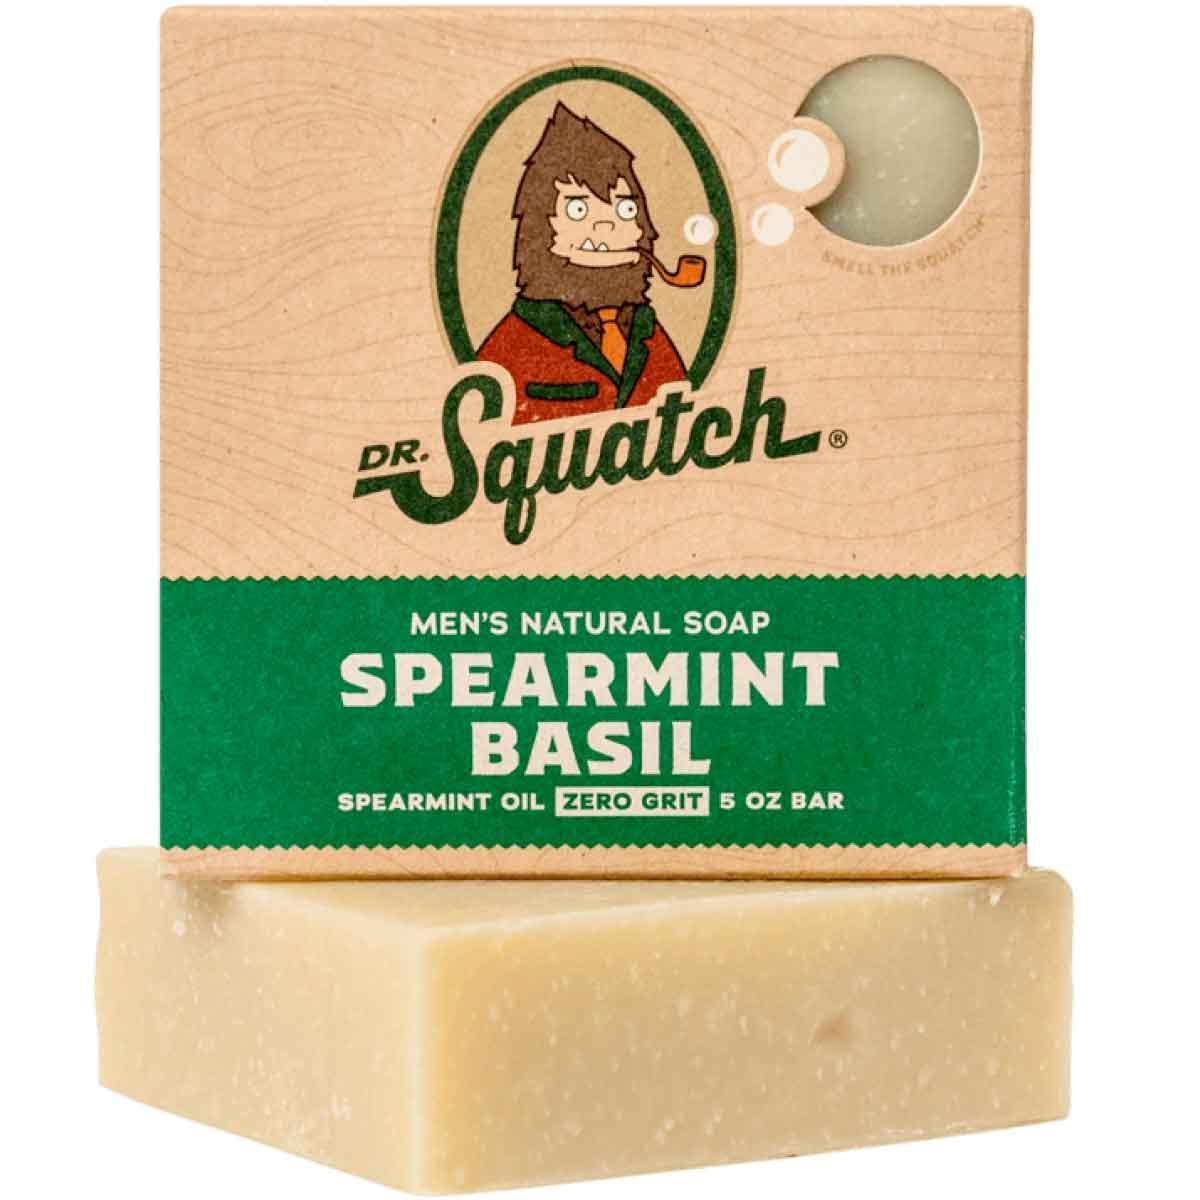  Dr. Squatch All Natural Bar Soap for Men with Medium